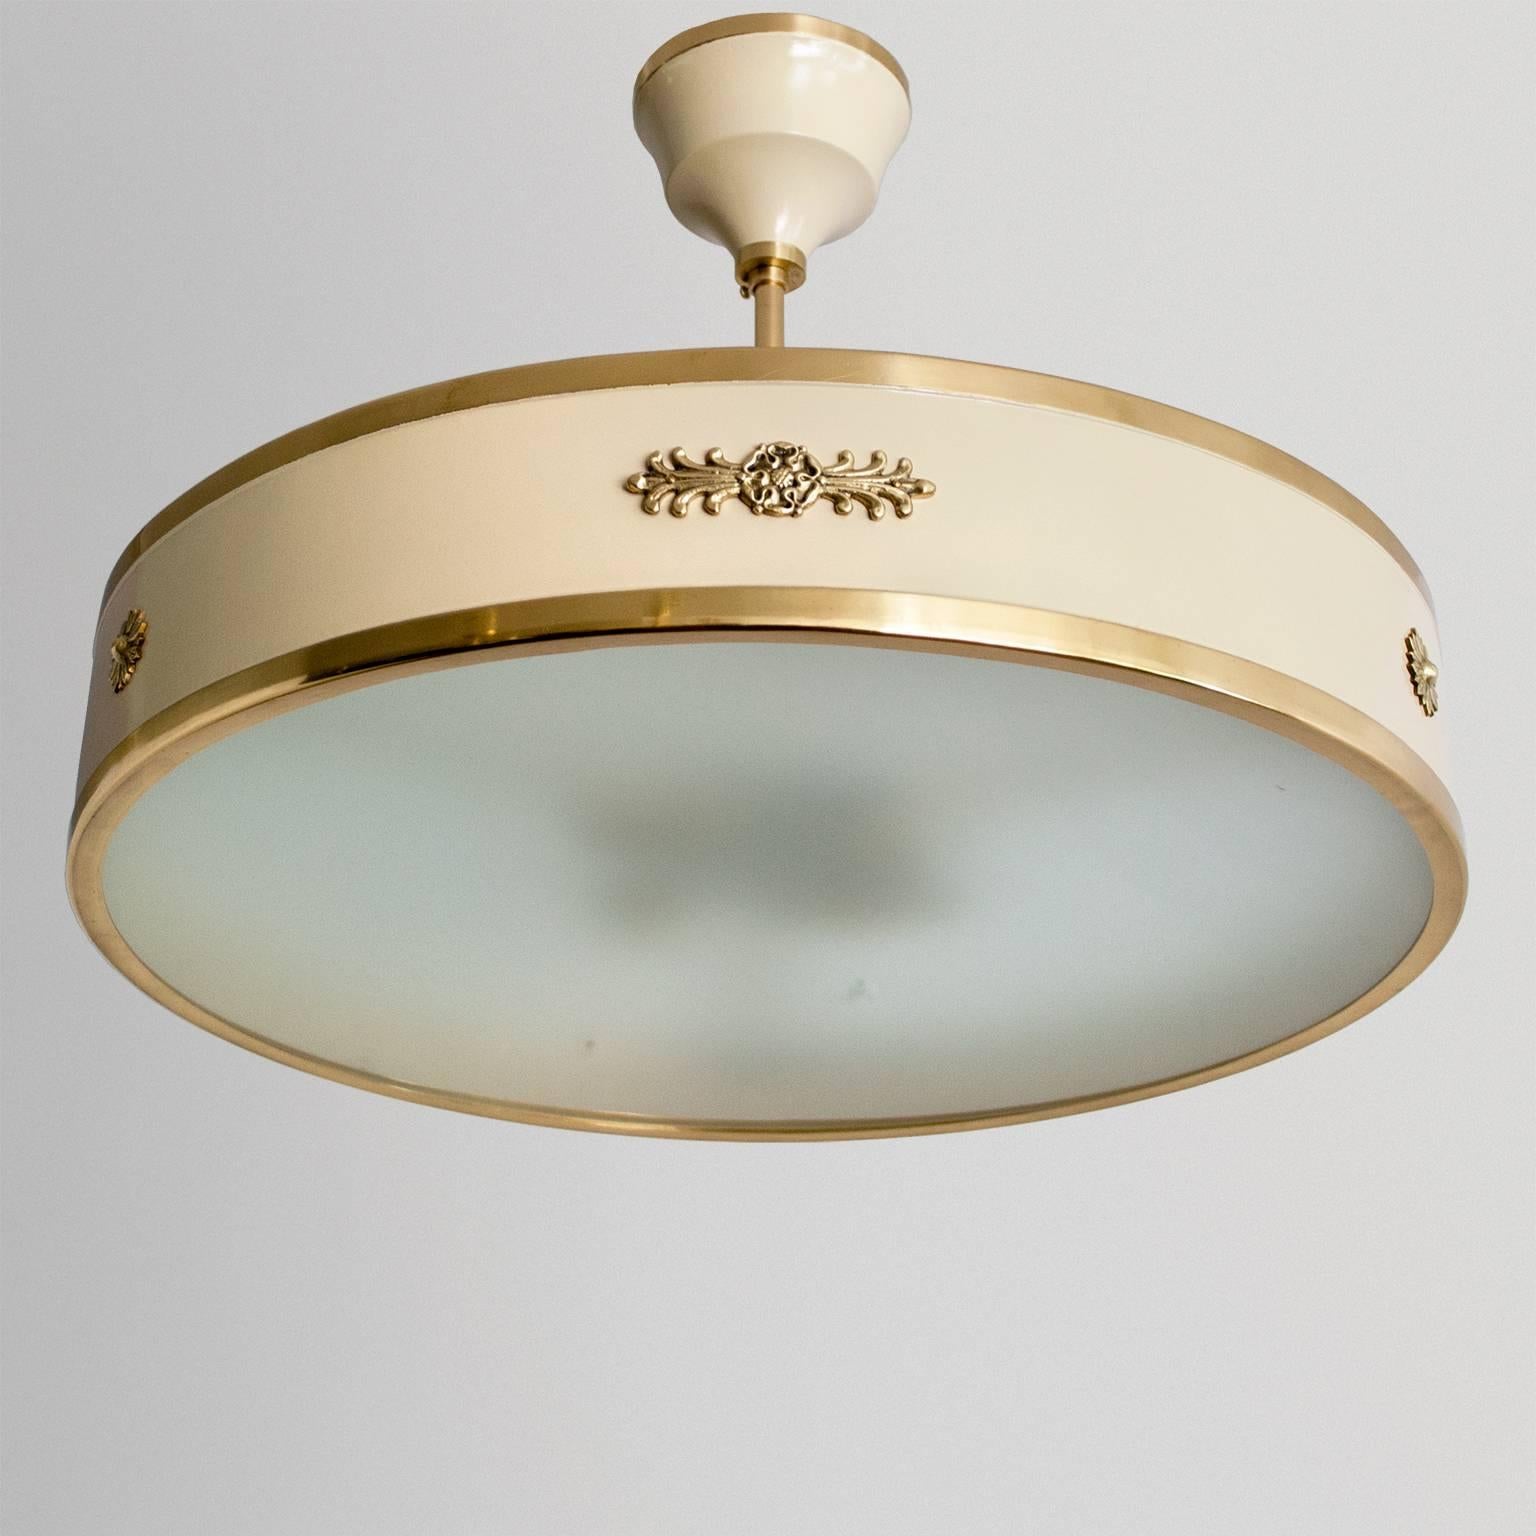 Scandinavian Modern art deco ceiling fixture with lacquered frame and details in polished brass, original acid etched glass shade. Decorative palmettes and rosettes reference classicism around the sides. Restored in excellent condition, newly wired